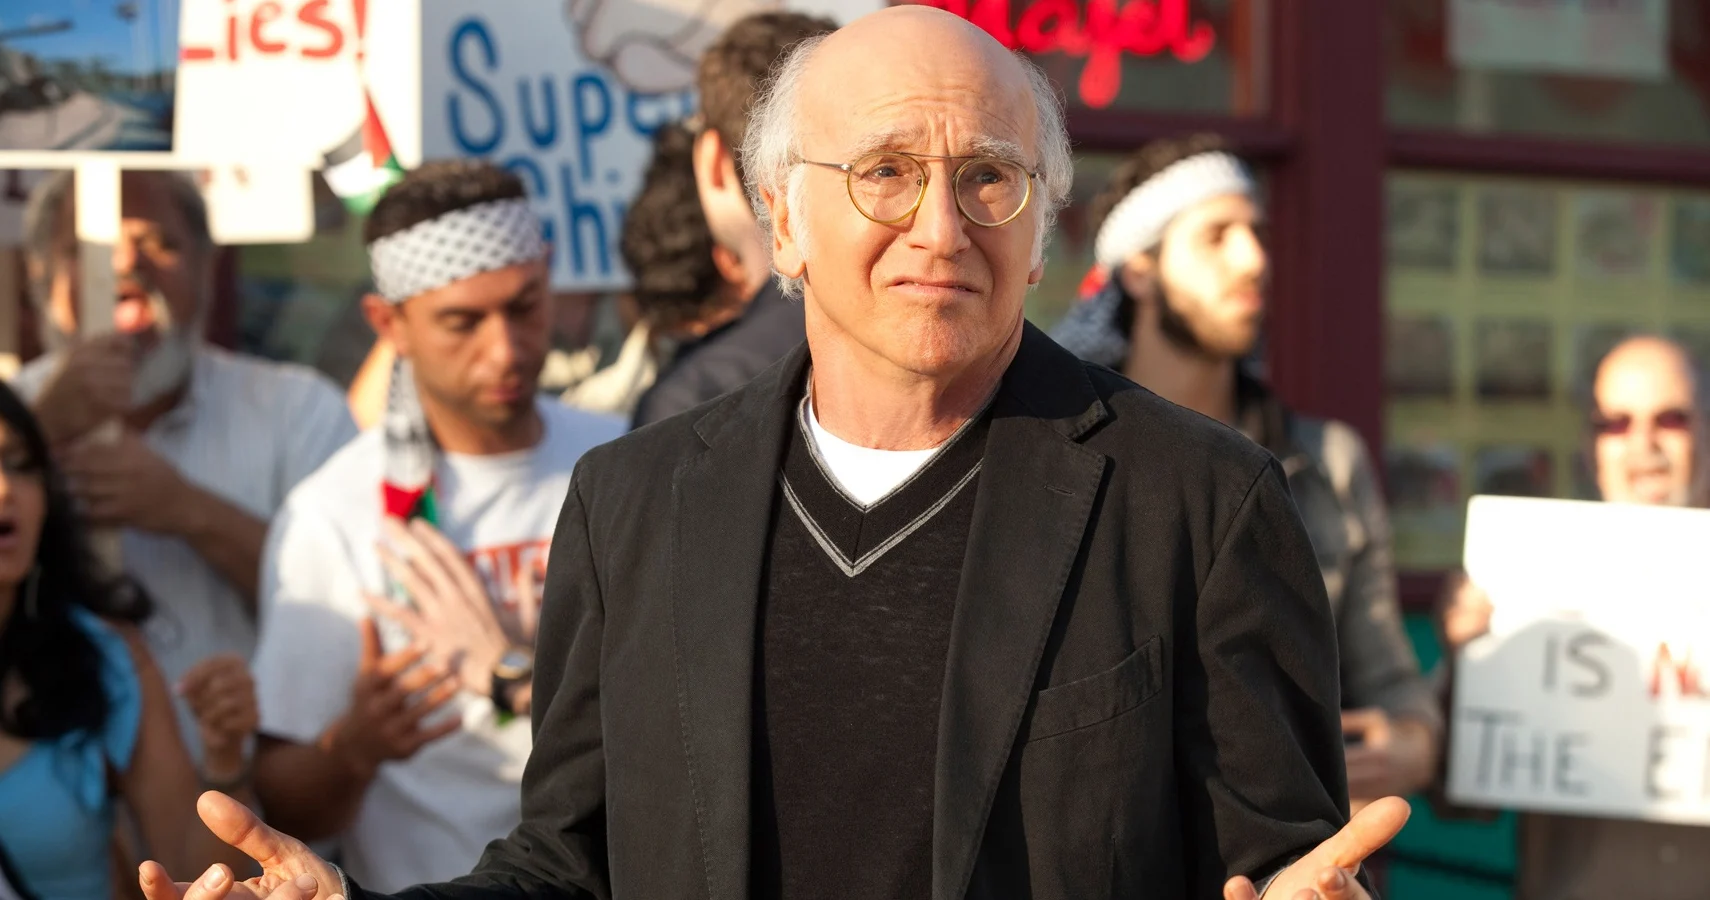 ‘Curb Your Enthusiasm’ Once Exonerated A Man For Murder